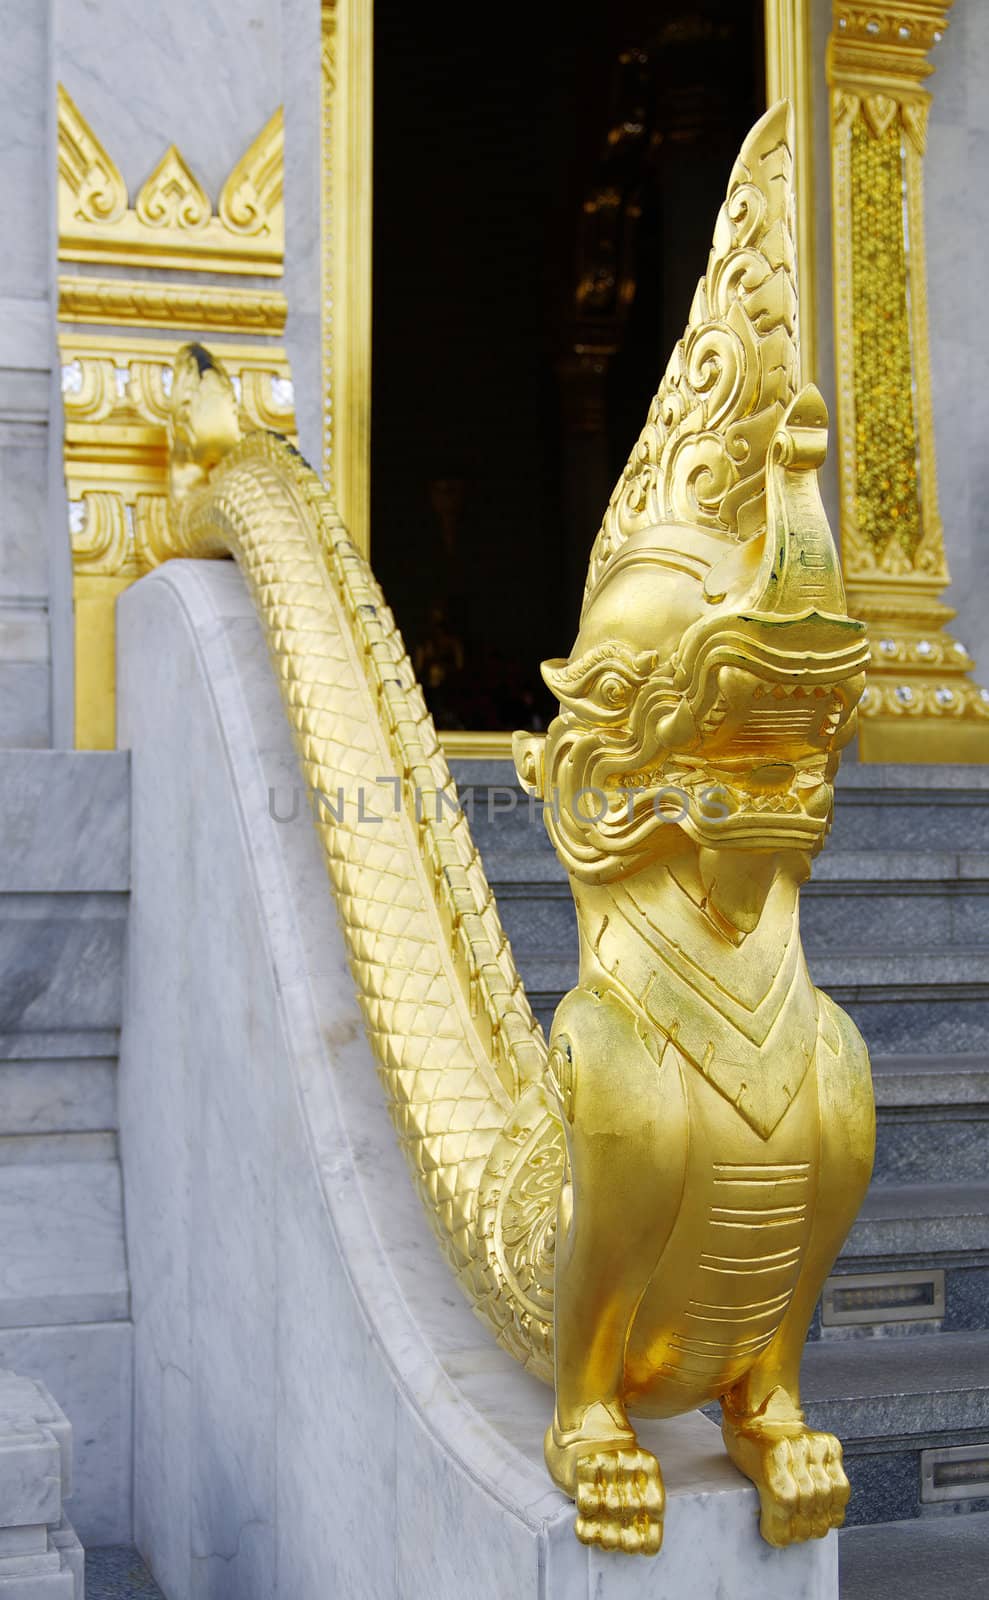 the golden dragon stairway in temple